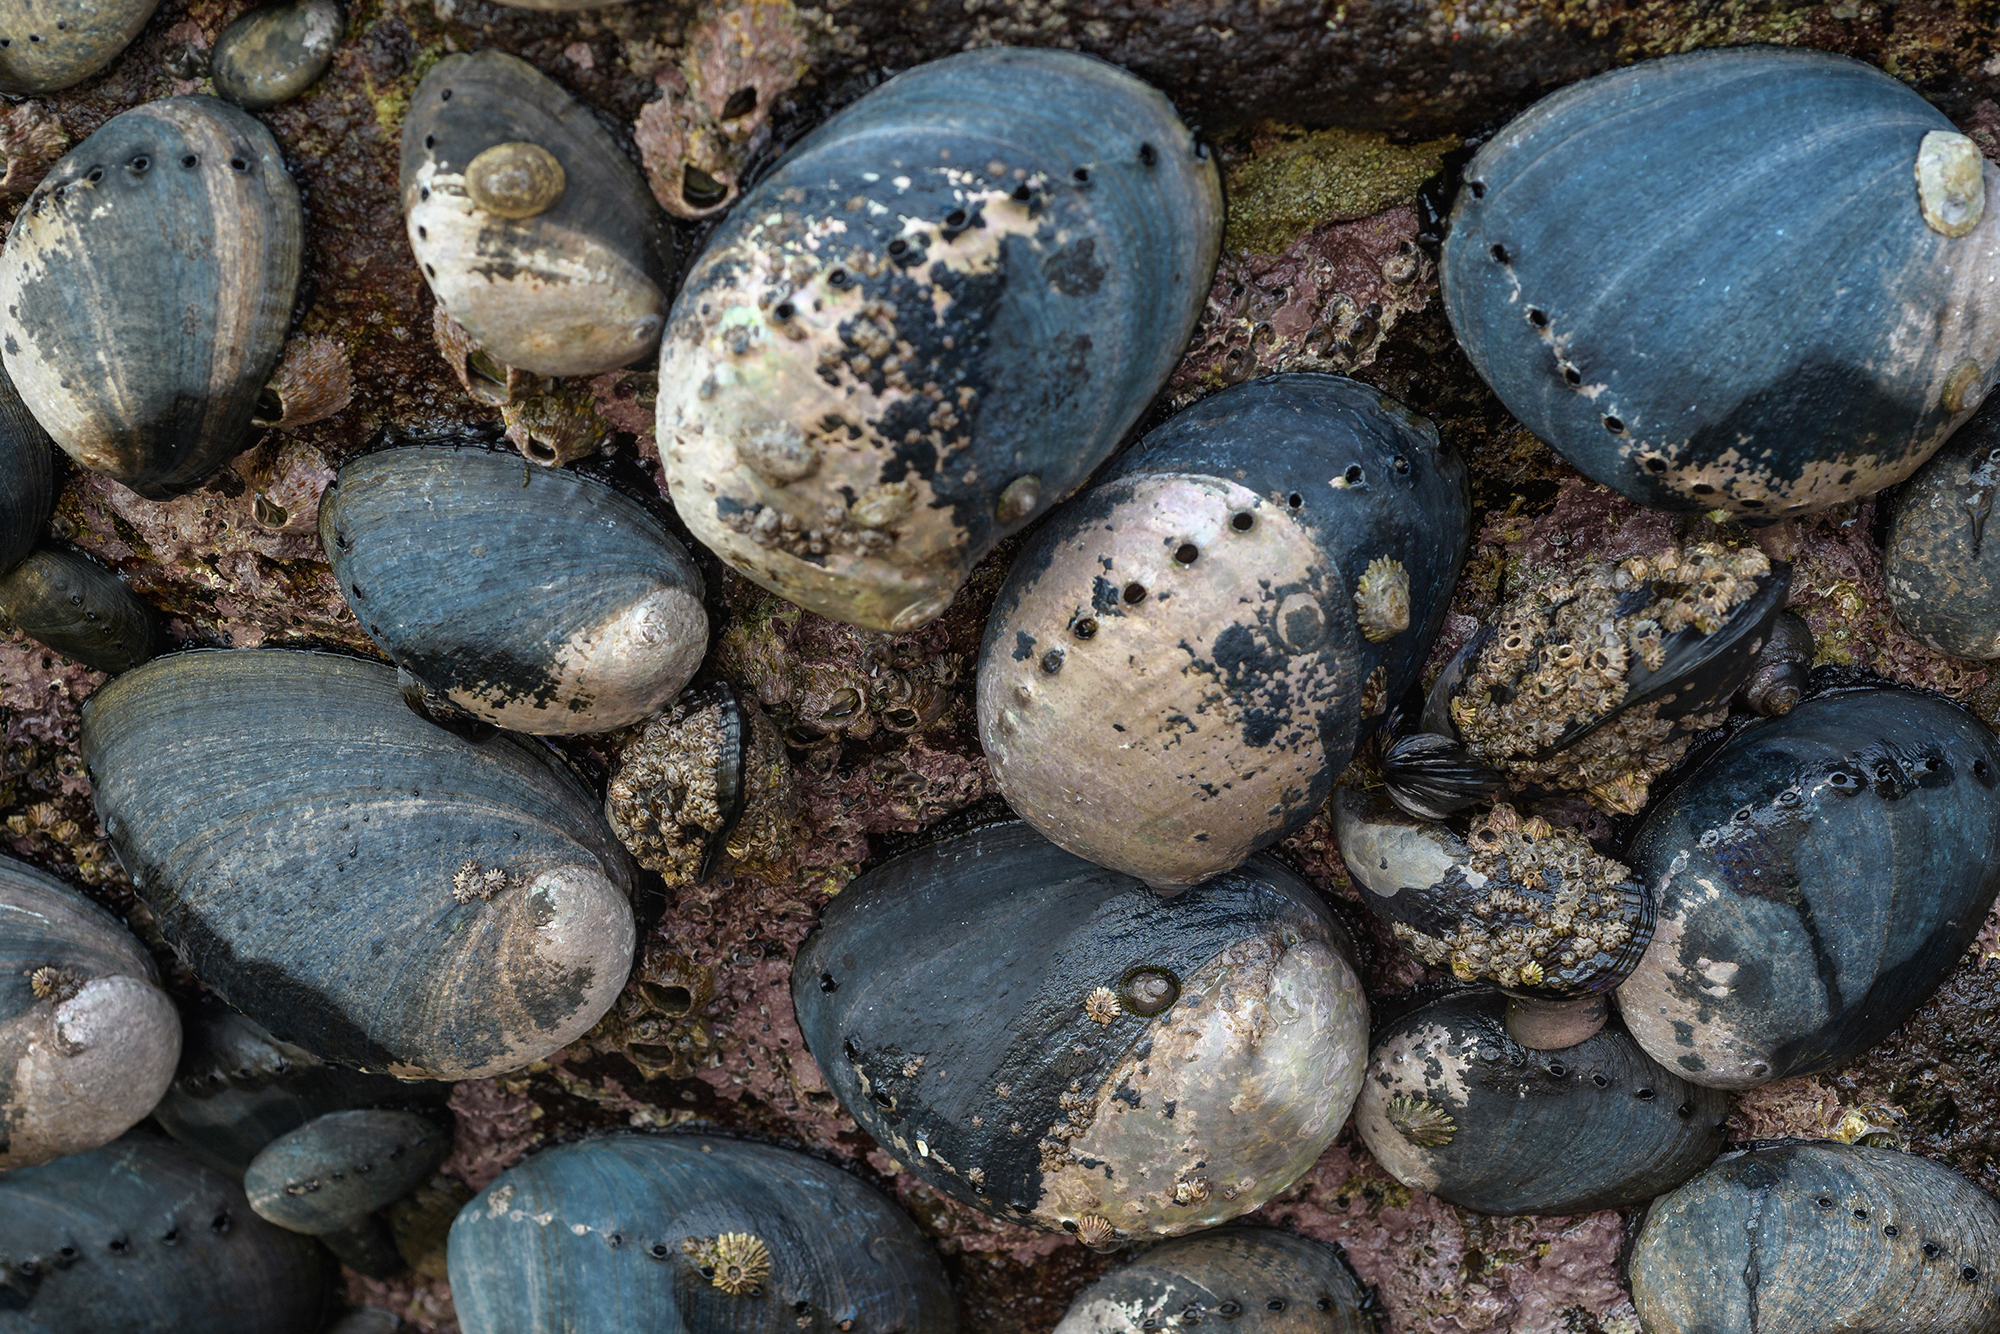 Section of rock covered mostly by sea snails with blue-black and pearlescent shells. Since the middle of the 20th century, development of the California coastline has exploded and these areas are now home to millions of people. Prior to this era, the coastlines were dominated by black abalone. Photo by Michael Ready, National Park Service